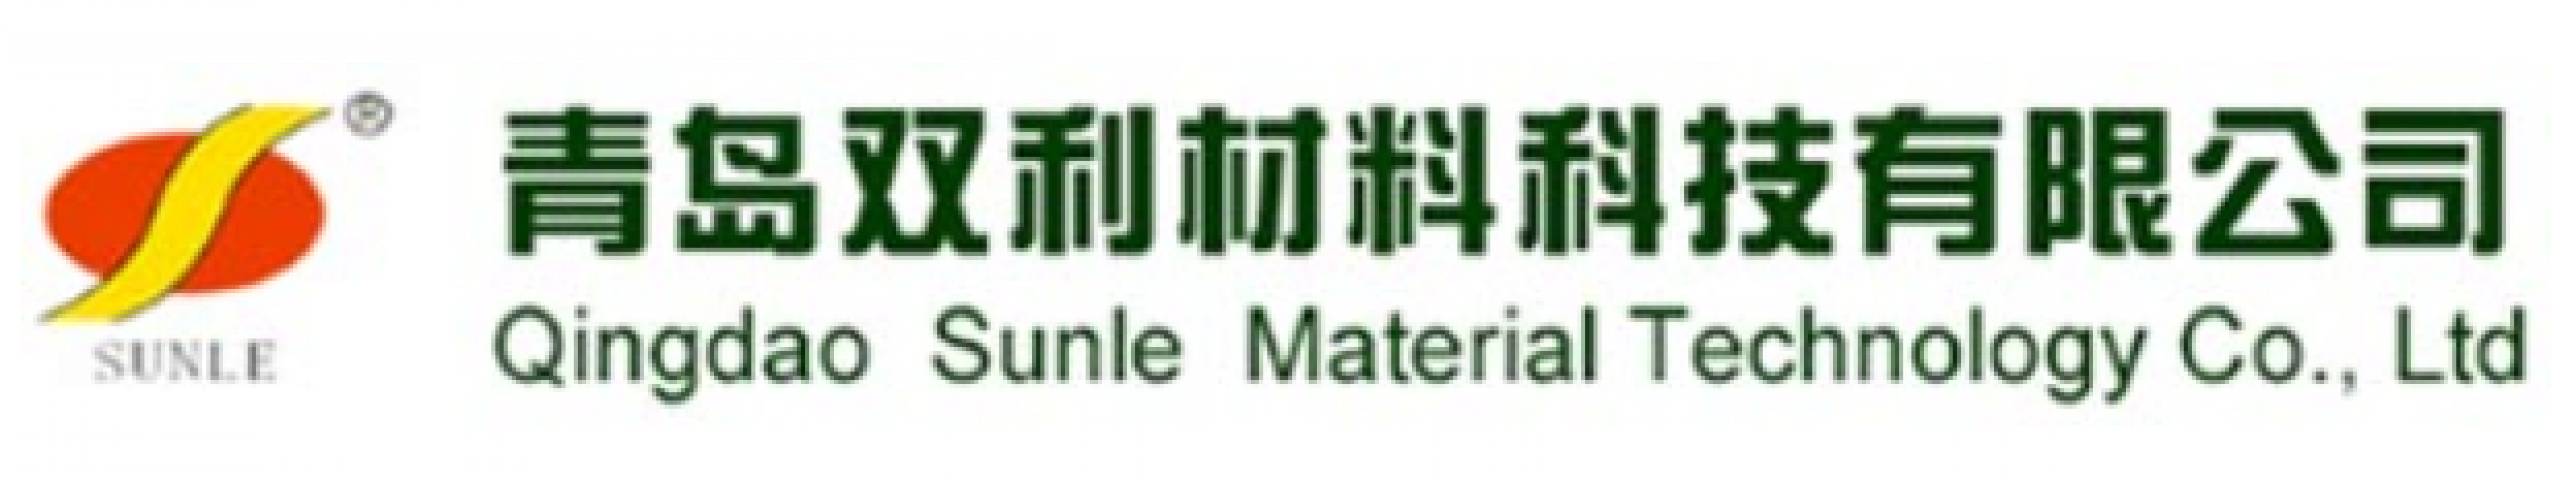 Qingdao Sunle Fortune Industry and Trade Co., Ltd./ Qingdao Sunle Material Technology Co., Ltd.